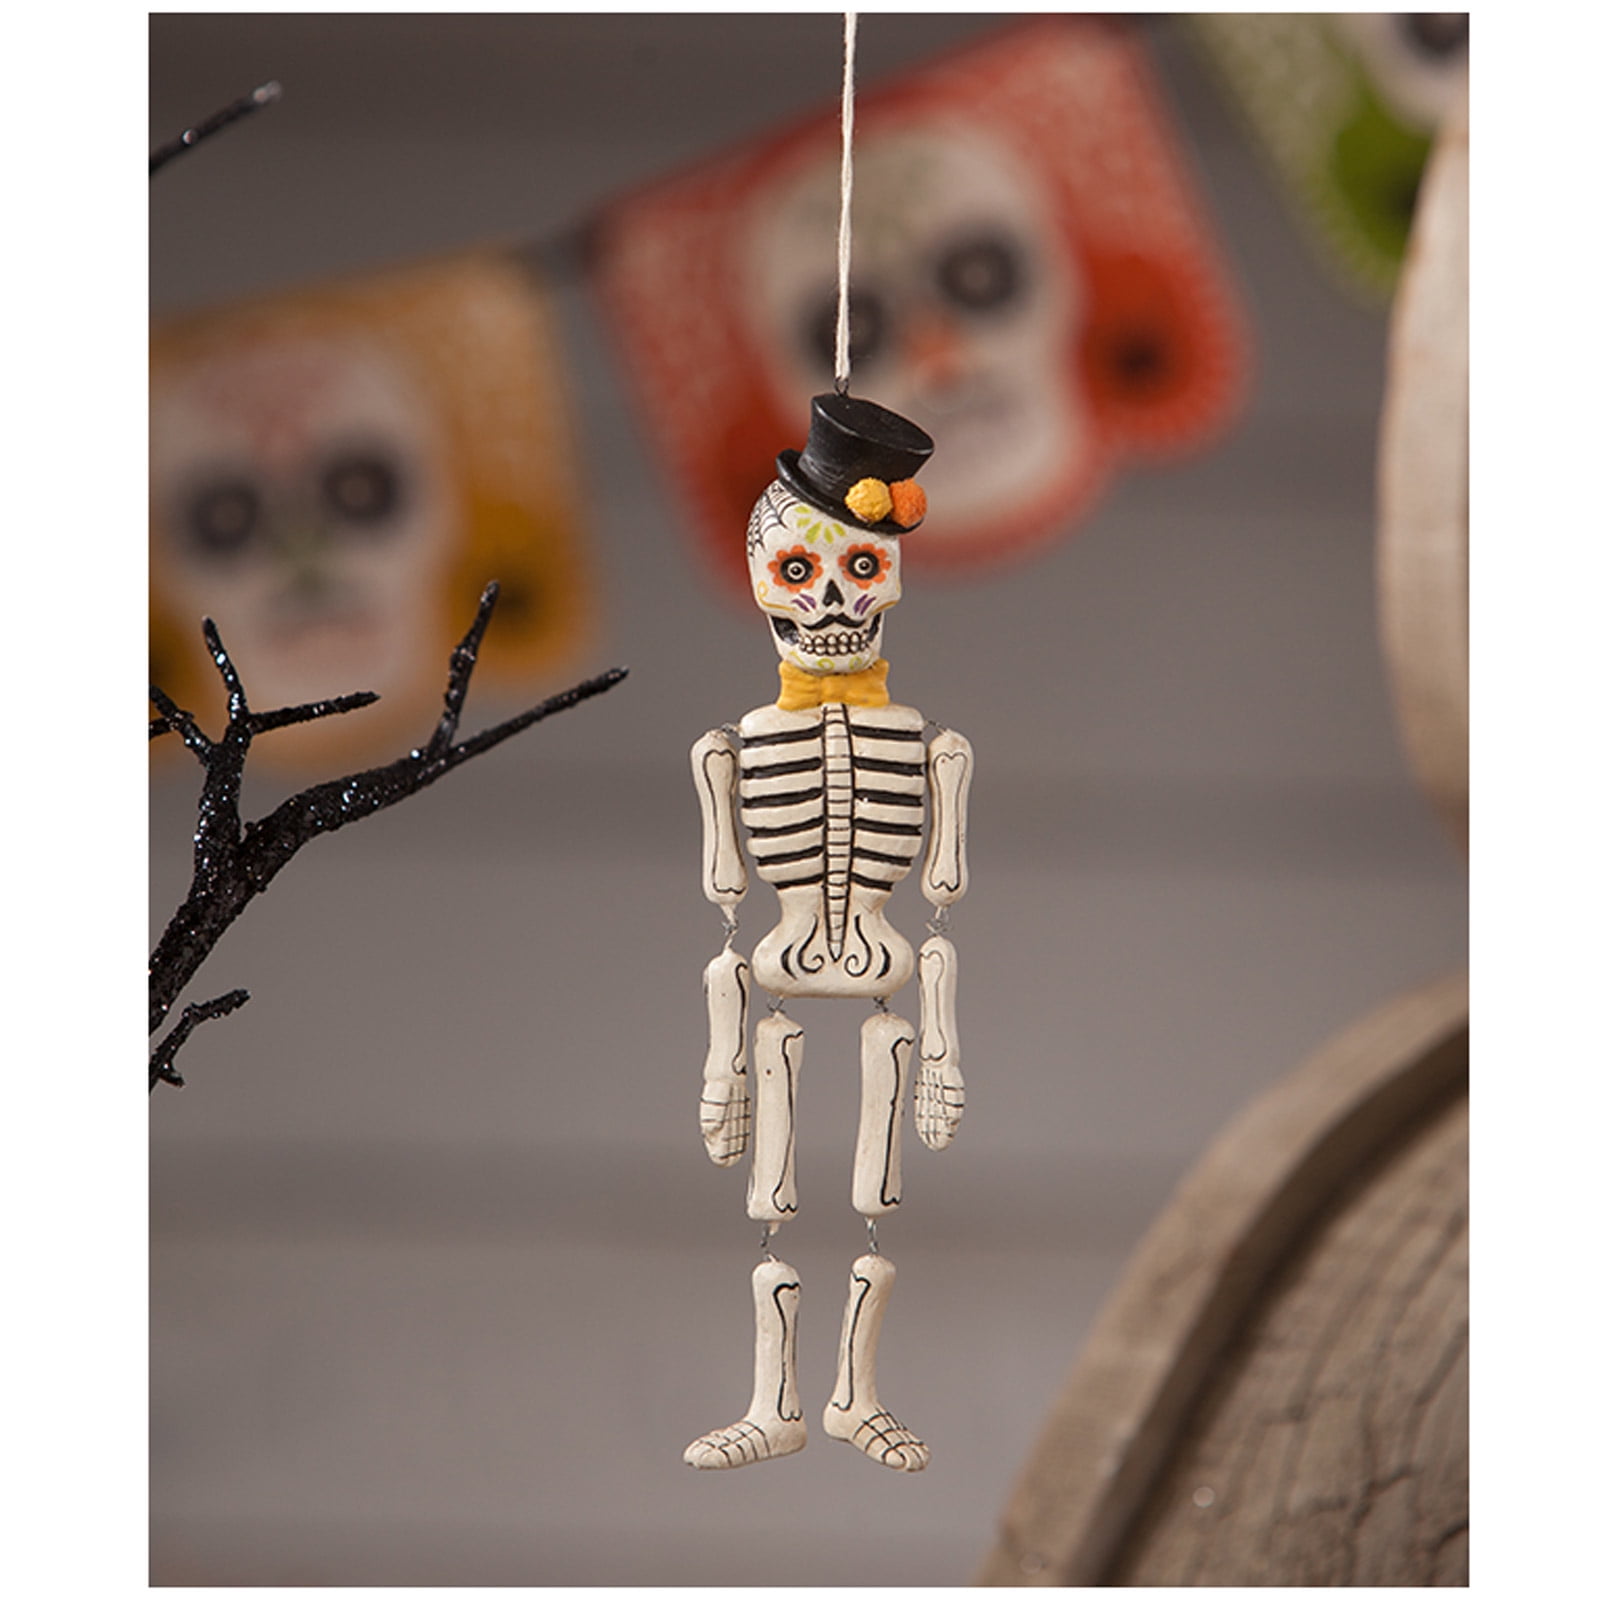 DAY OF THE DEAD Skeleton Ornament by Bethany Lowe Dia De Los Muertos 